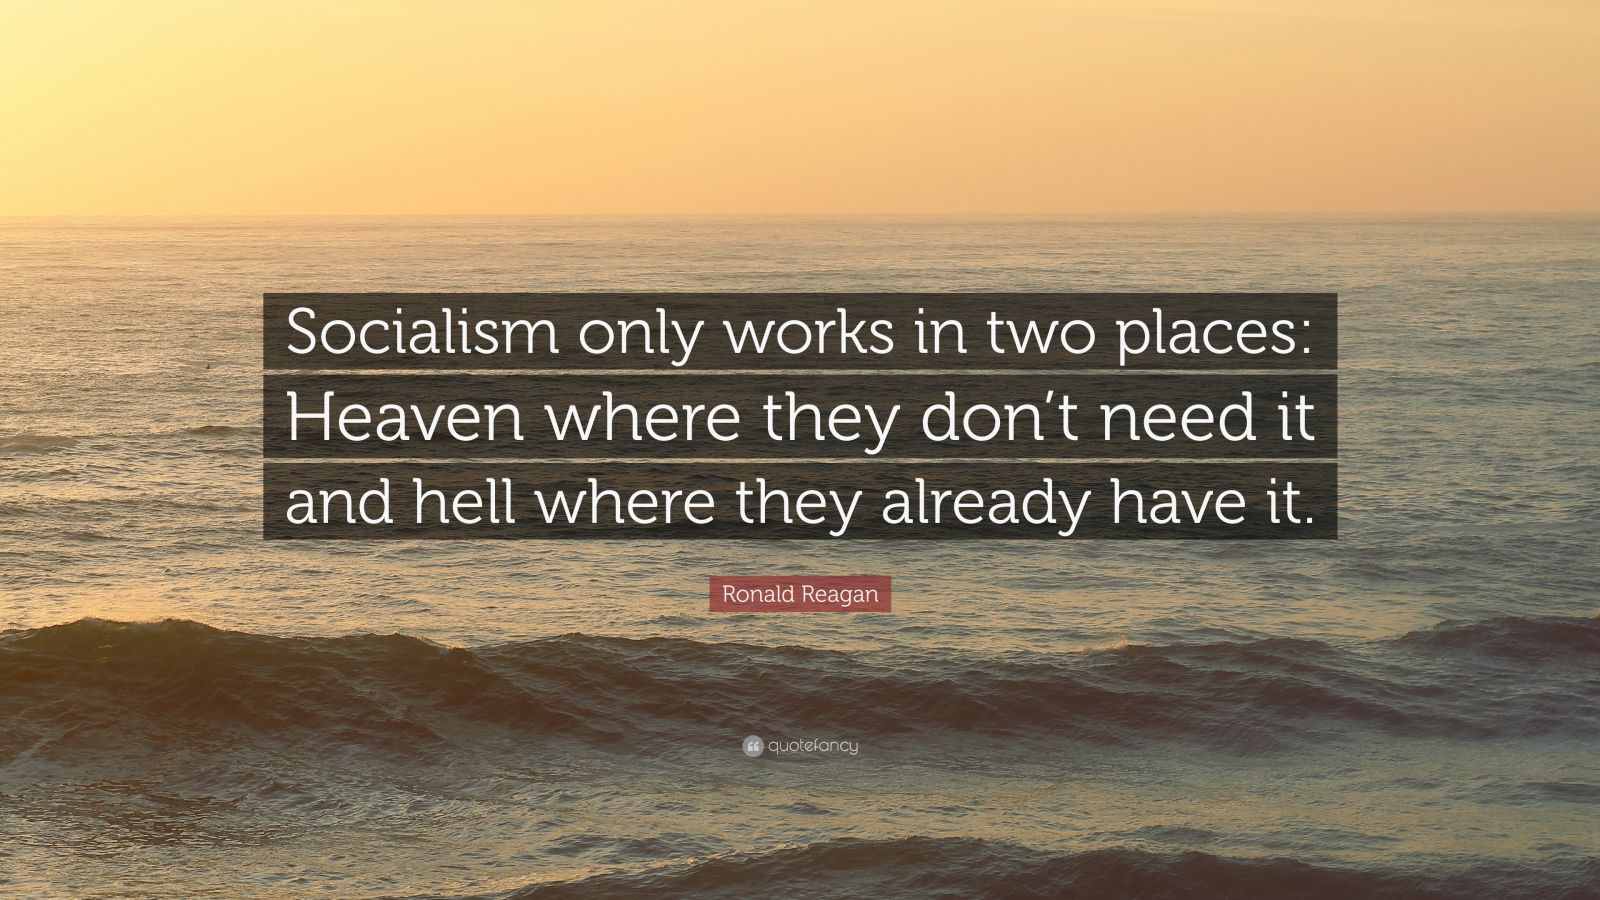 Ronald Reagan Quote: "Socialism only works in two places: Heaven where they don't need it and ...